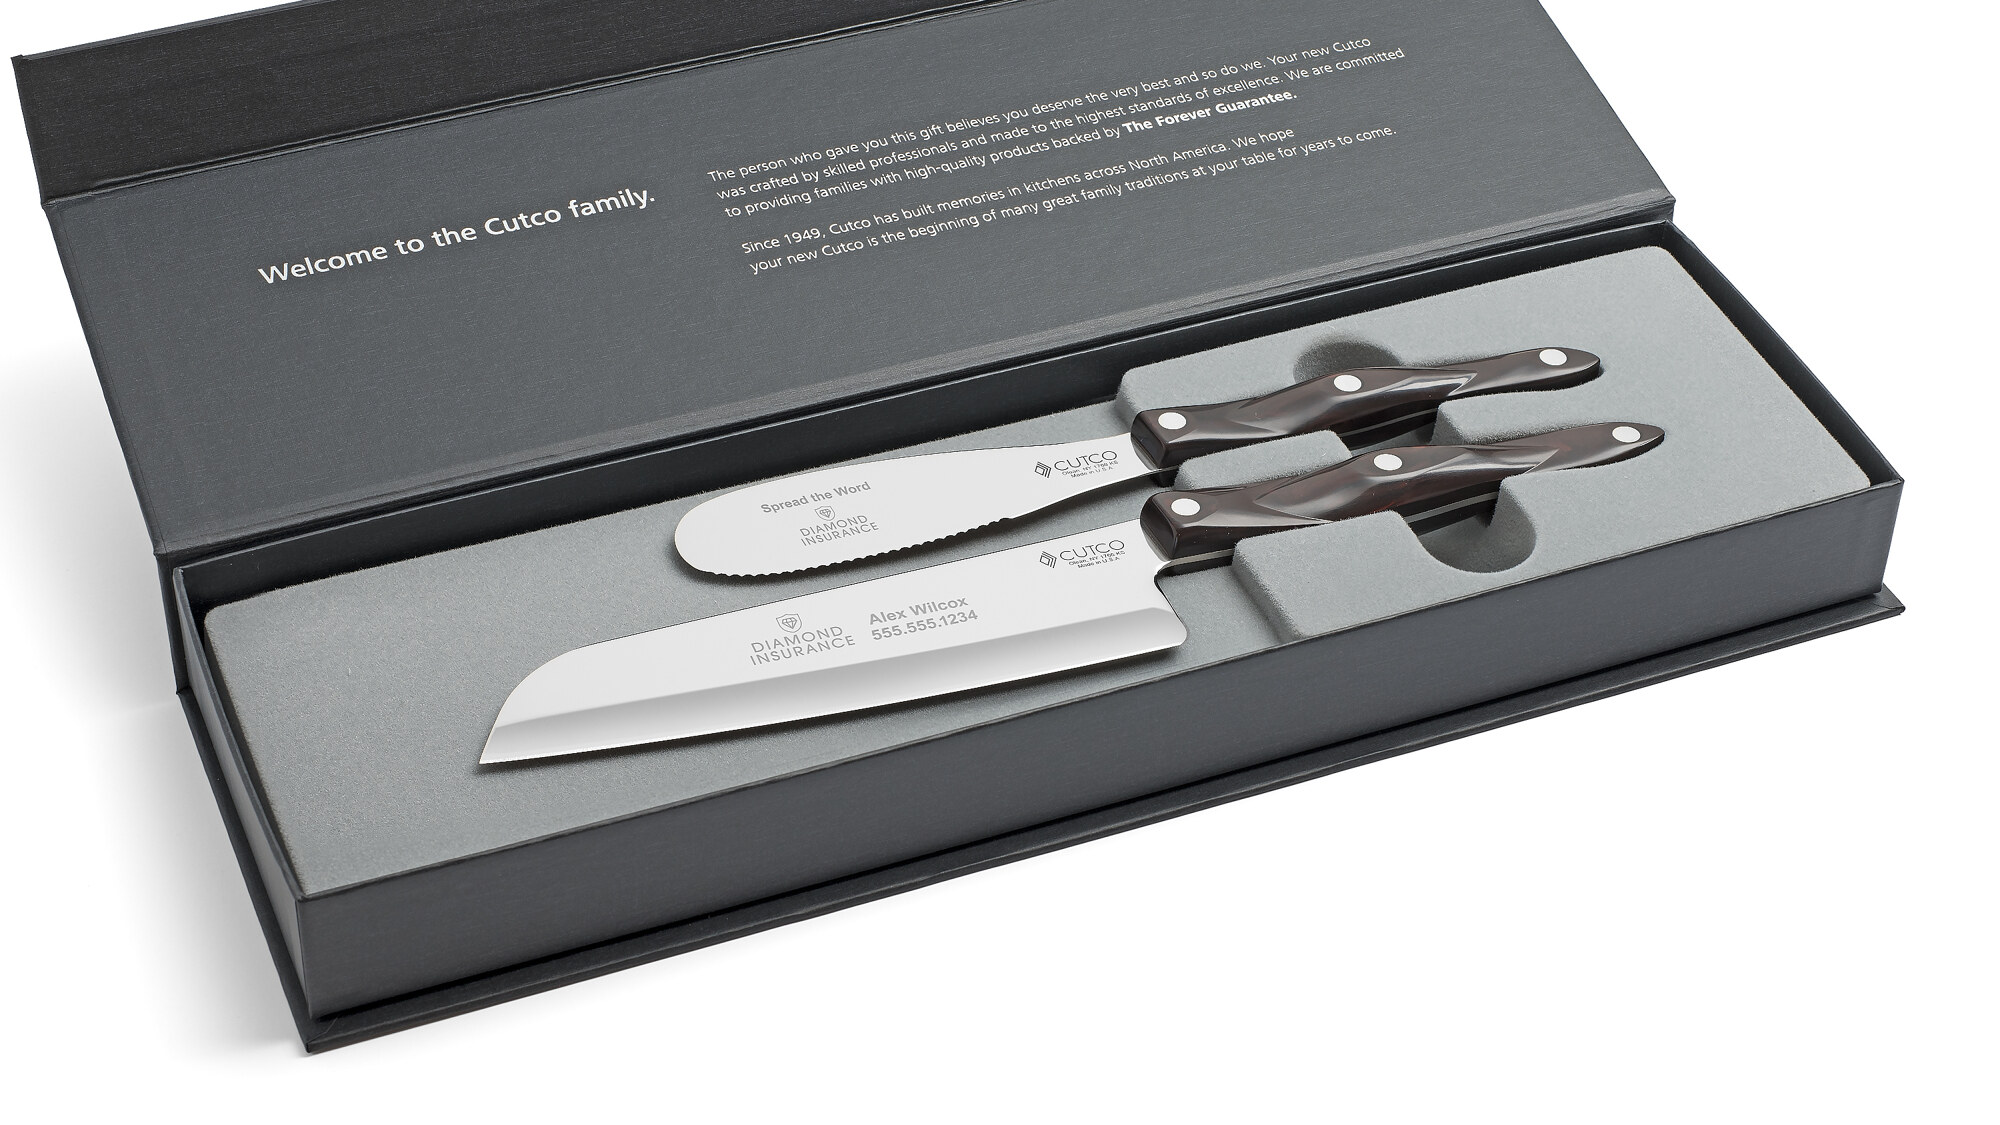 2 Products - Culinary Companions Product in Deluxe Gift Box